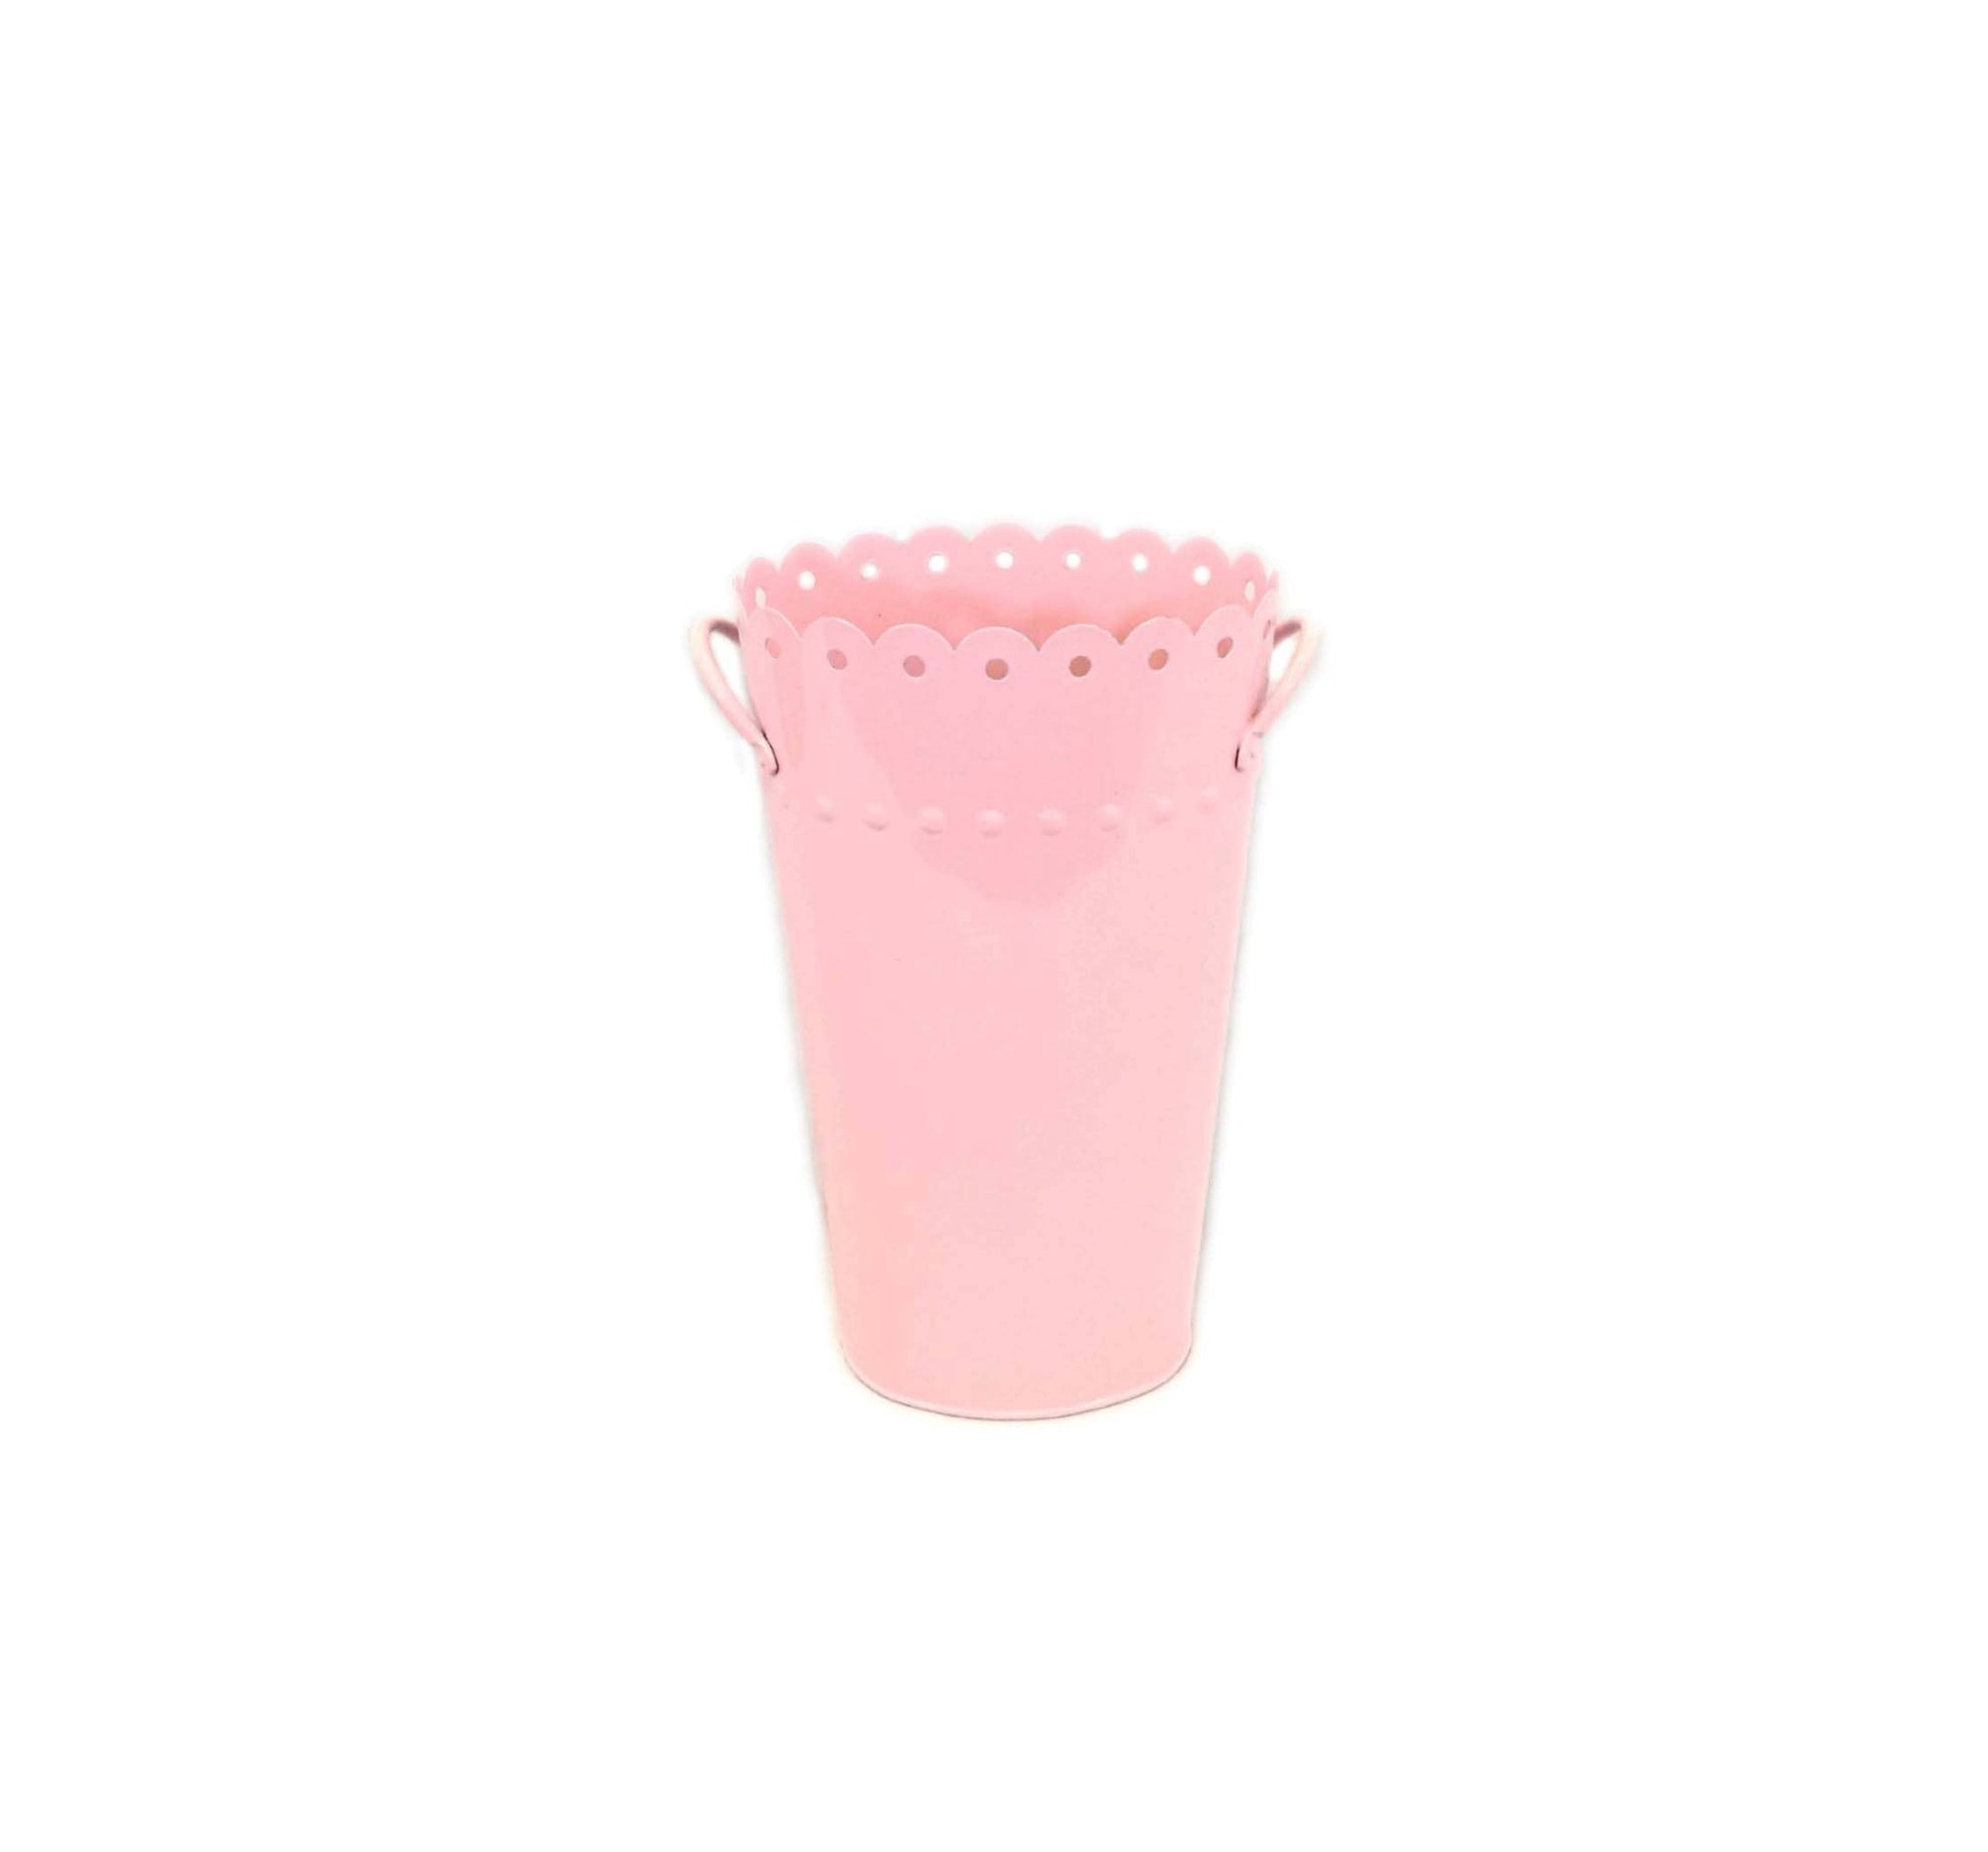 7" Scalloped French Bucket: Pink